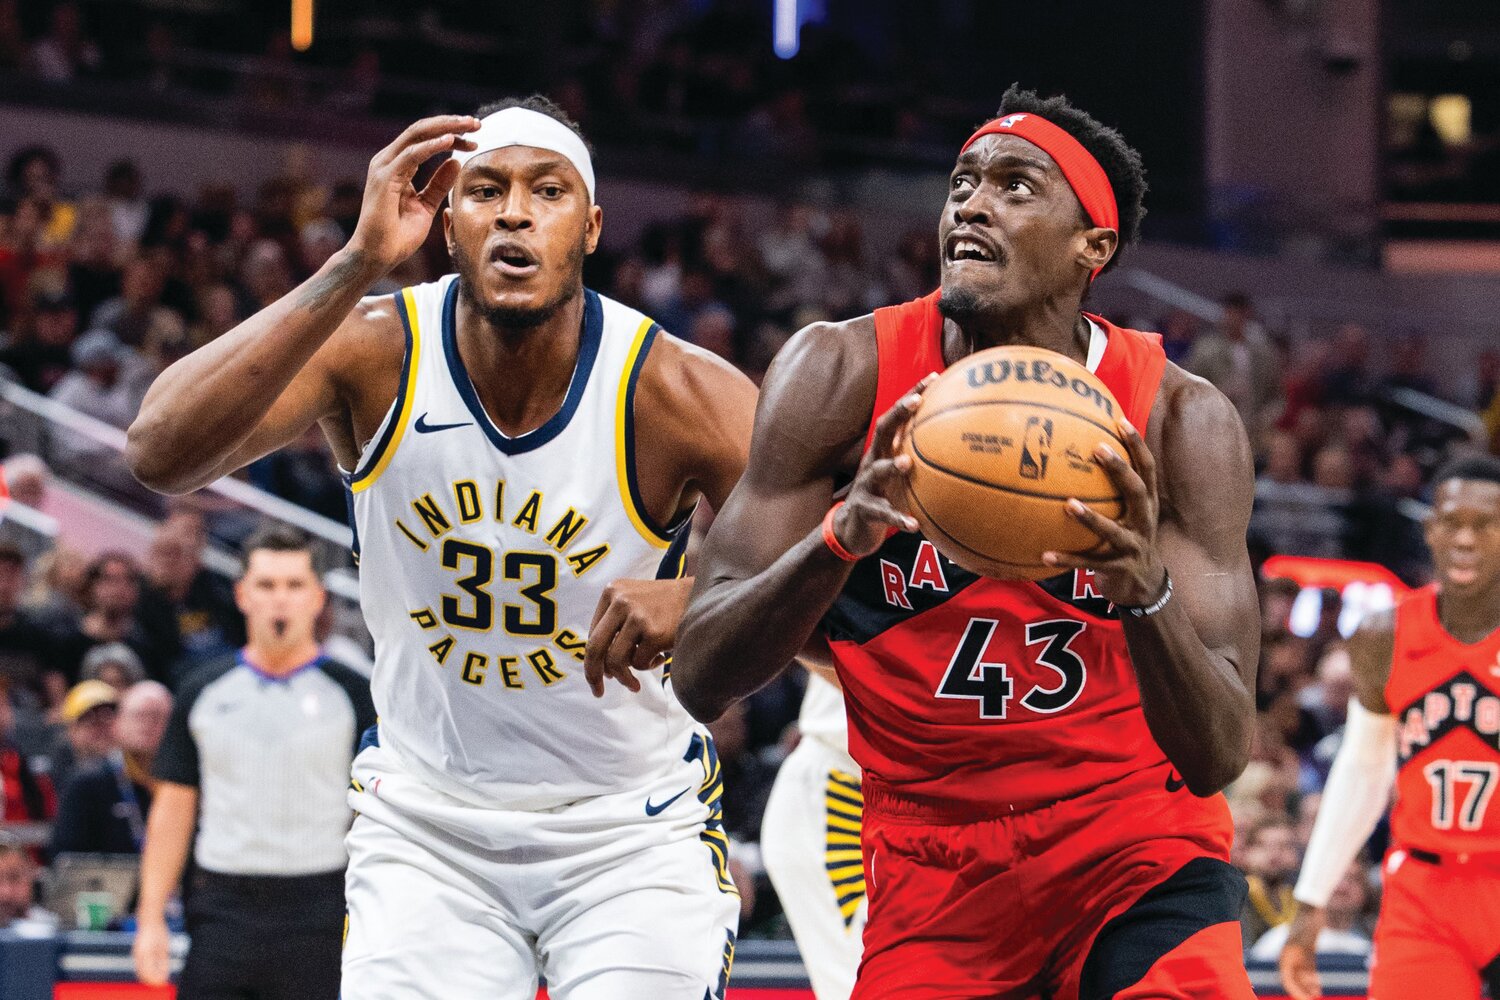 The Indiana Pacers have acquired All-Star forward Pascal Siakam from the Toronto Raptors for 3 first round picks, Bruce Brown and Jordan Nwora according to ESPN's Adrian Wojnarowski